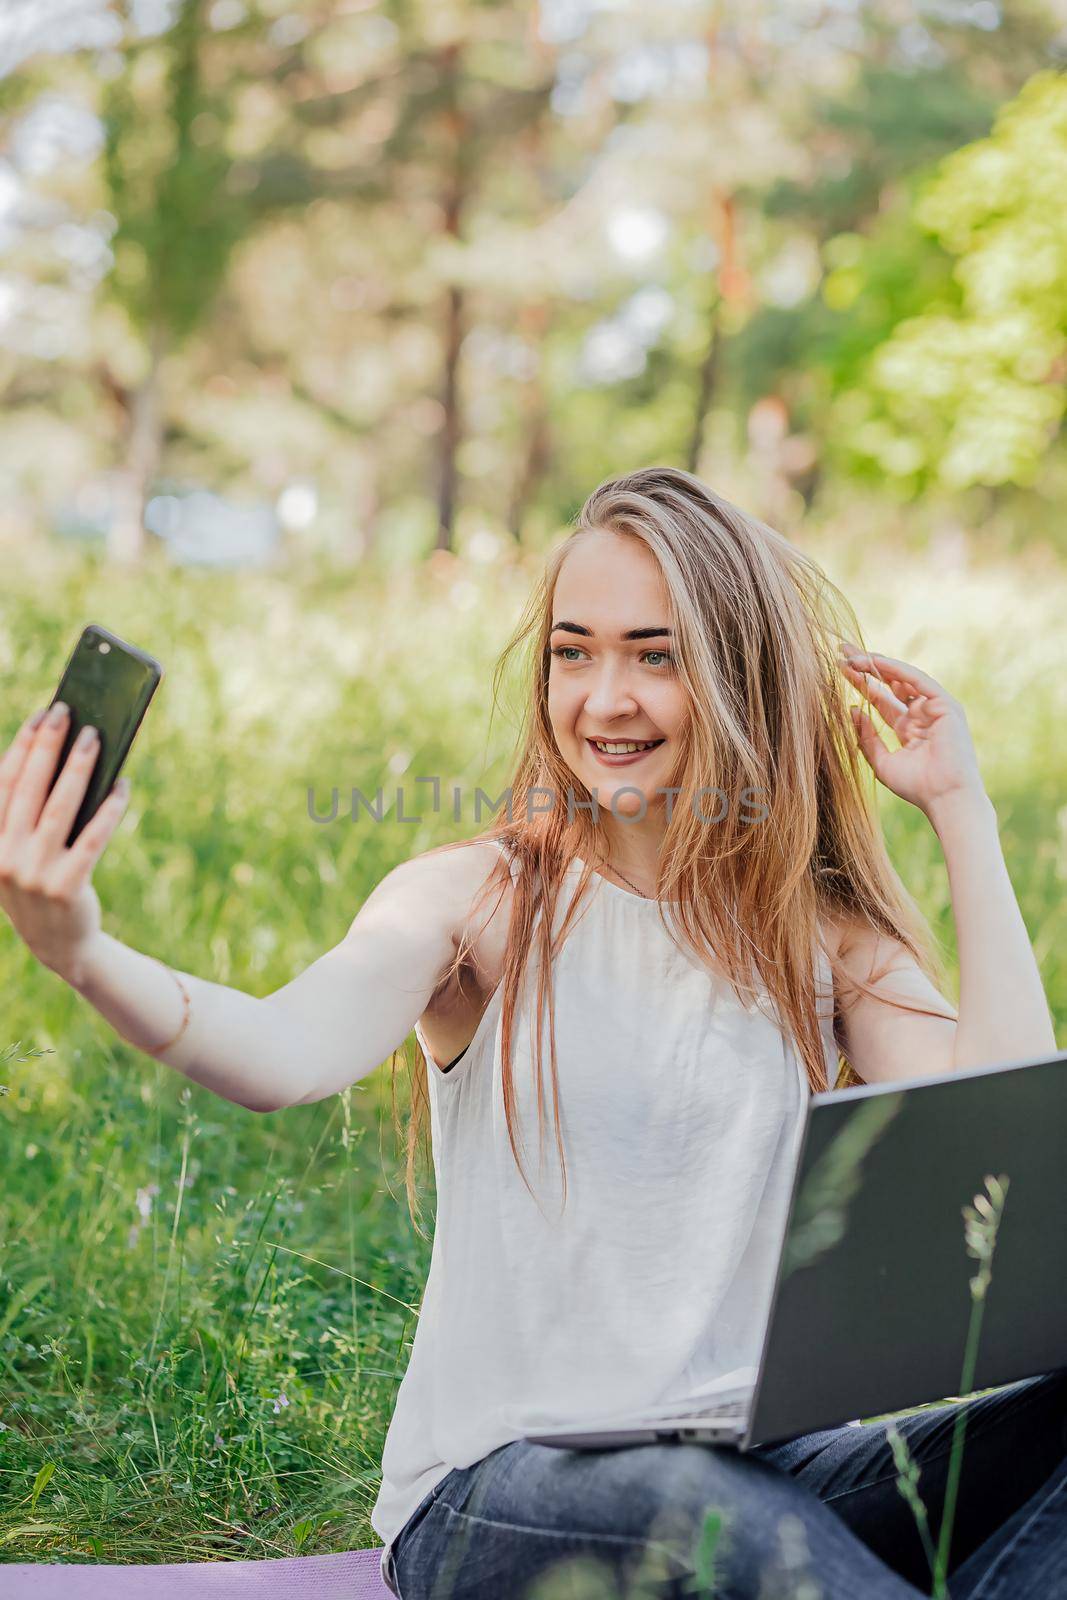 girl sits outdoors and works at a laptop. makes a selfie on the phone. freelance. selfeducation. the concept of remote learning and outdoor work